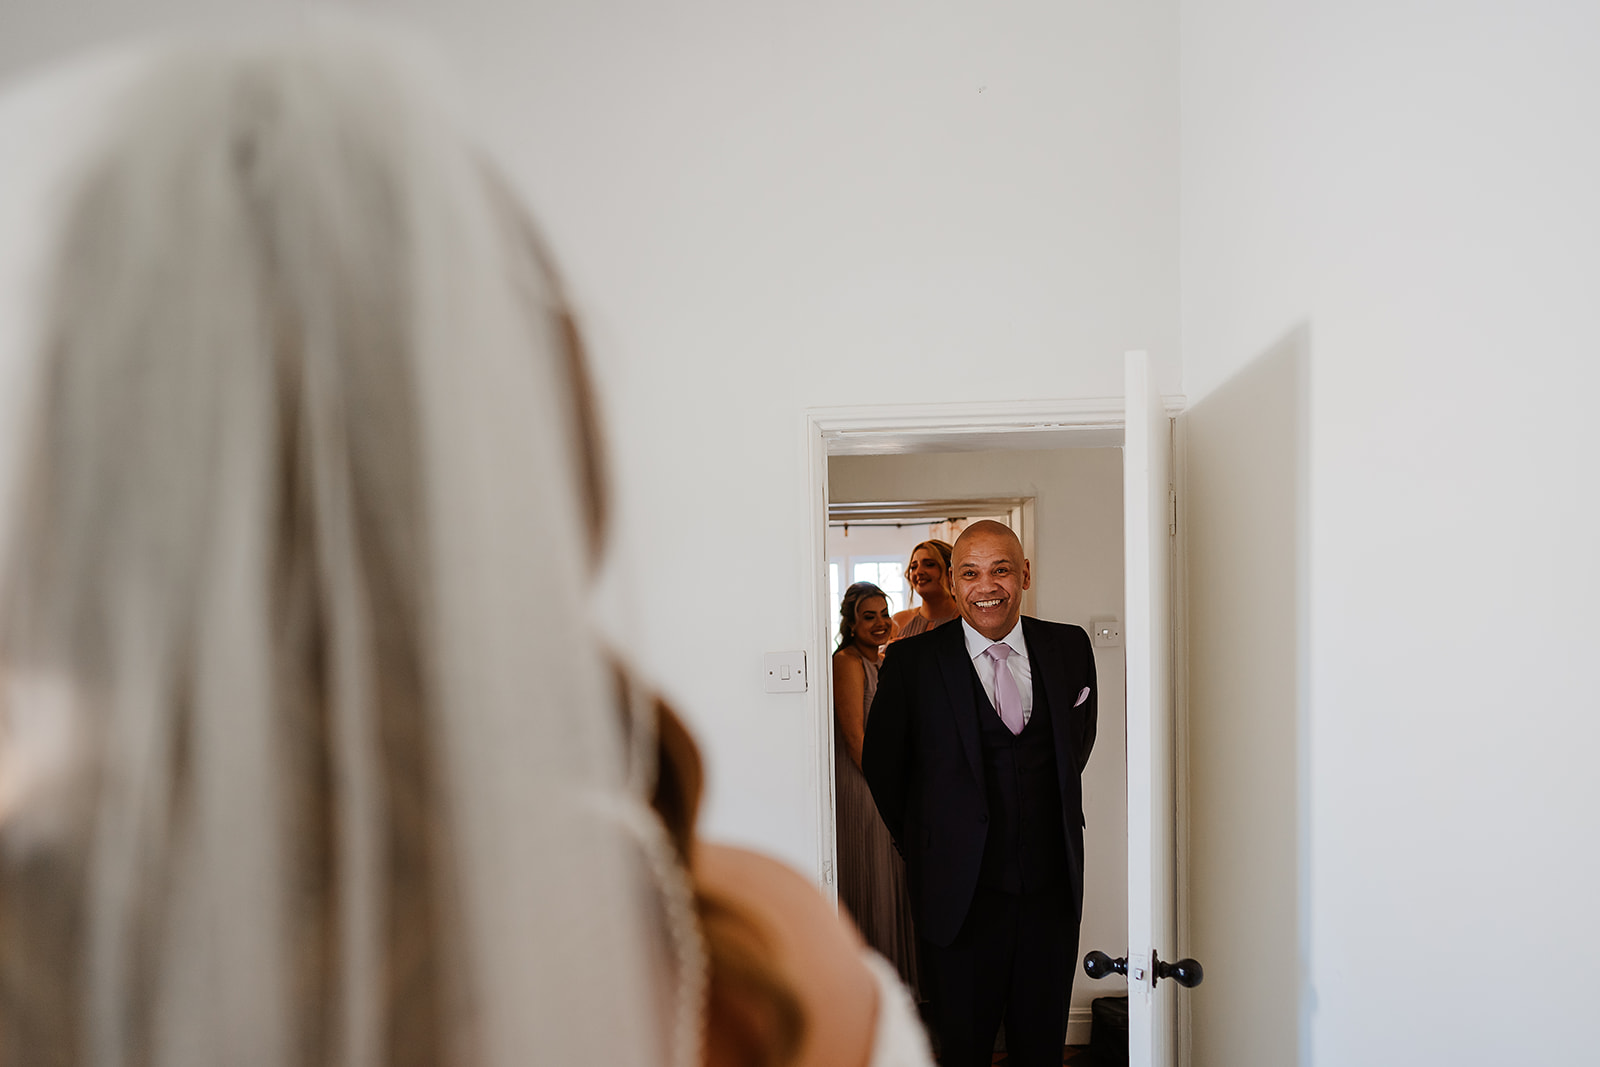 Father of bride emerges through doorway smiling